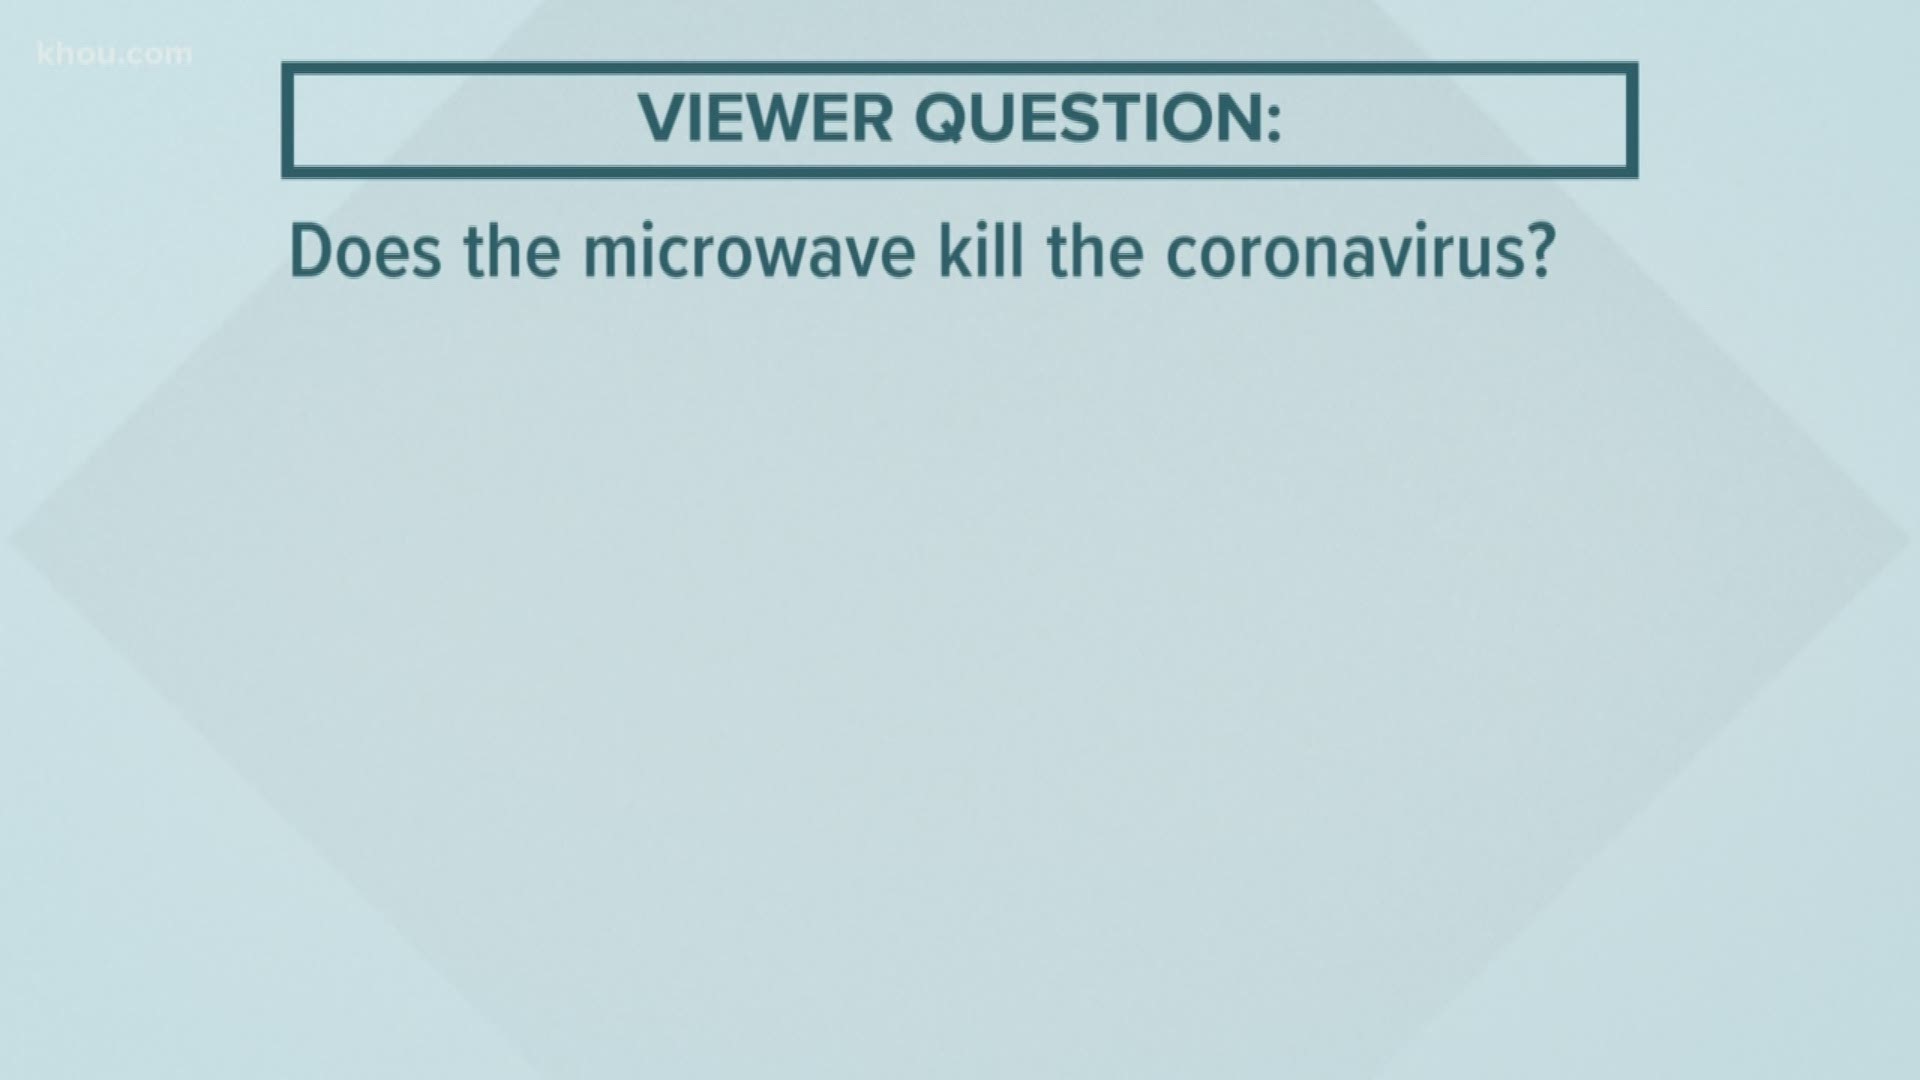 Experts say there is no evidence that proves microwaves kill the coronavirus.